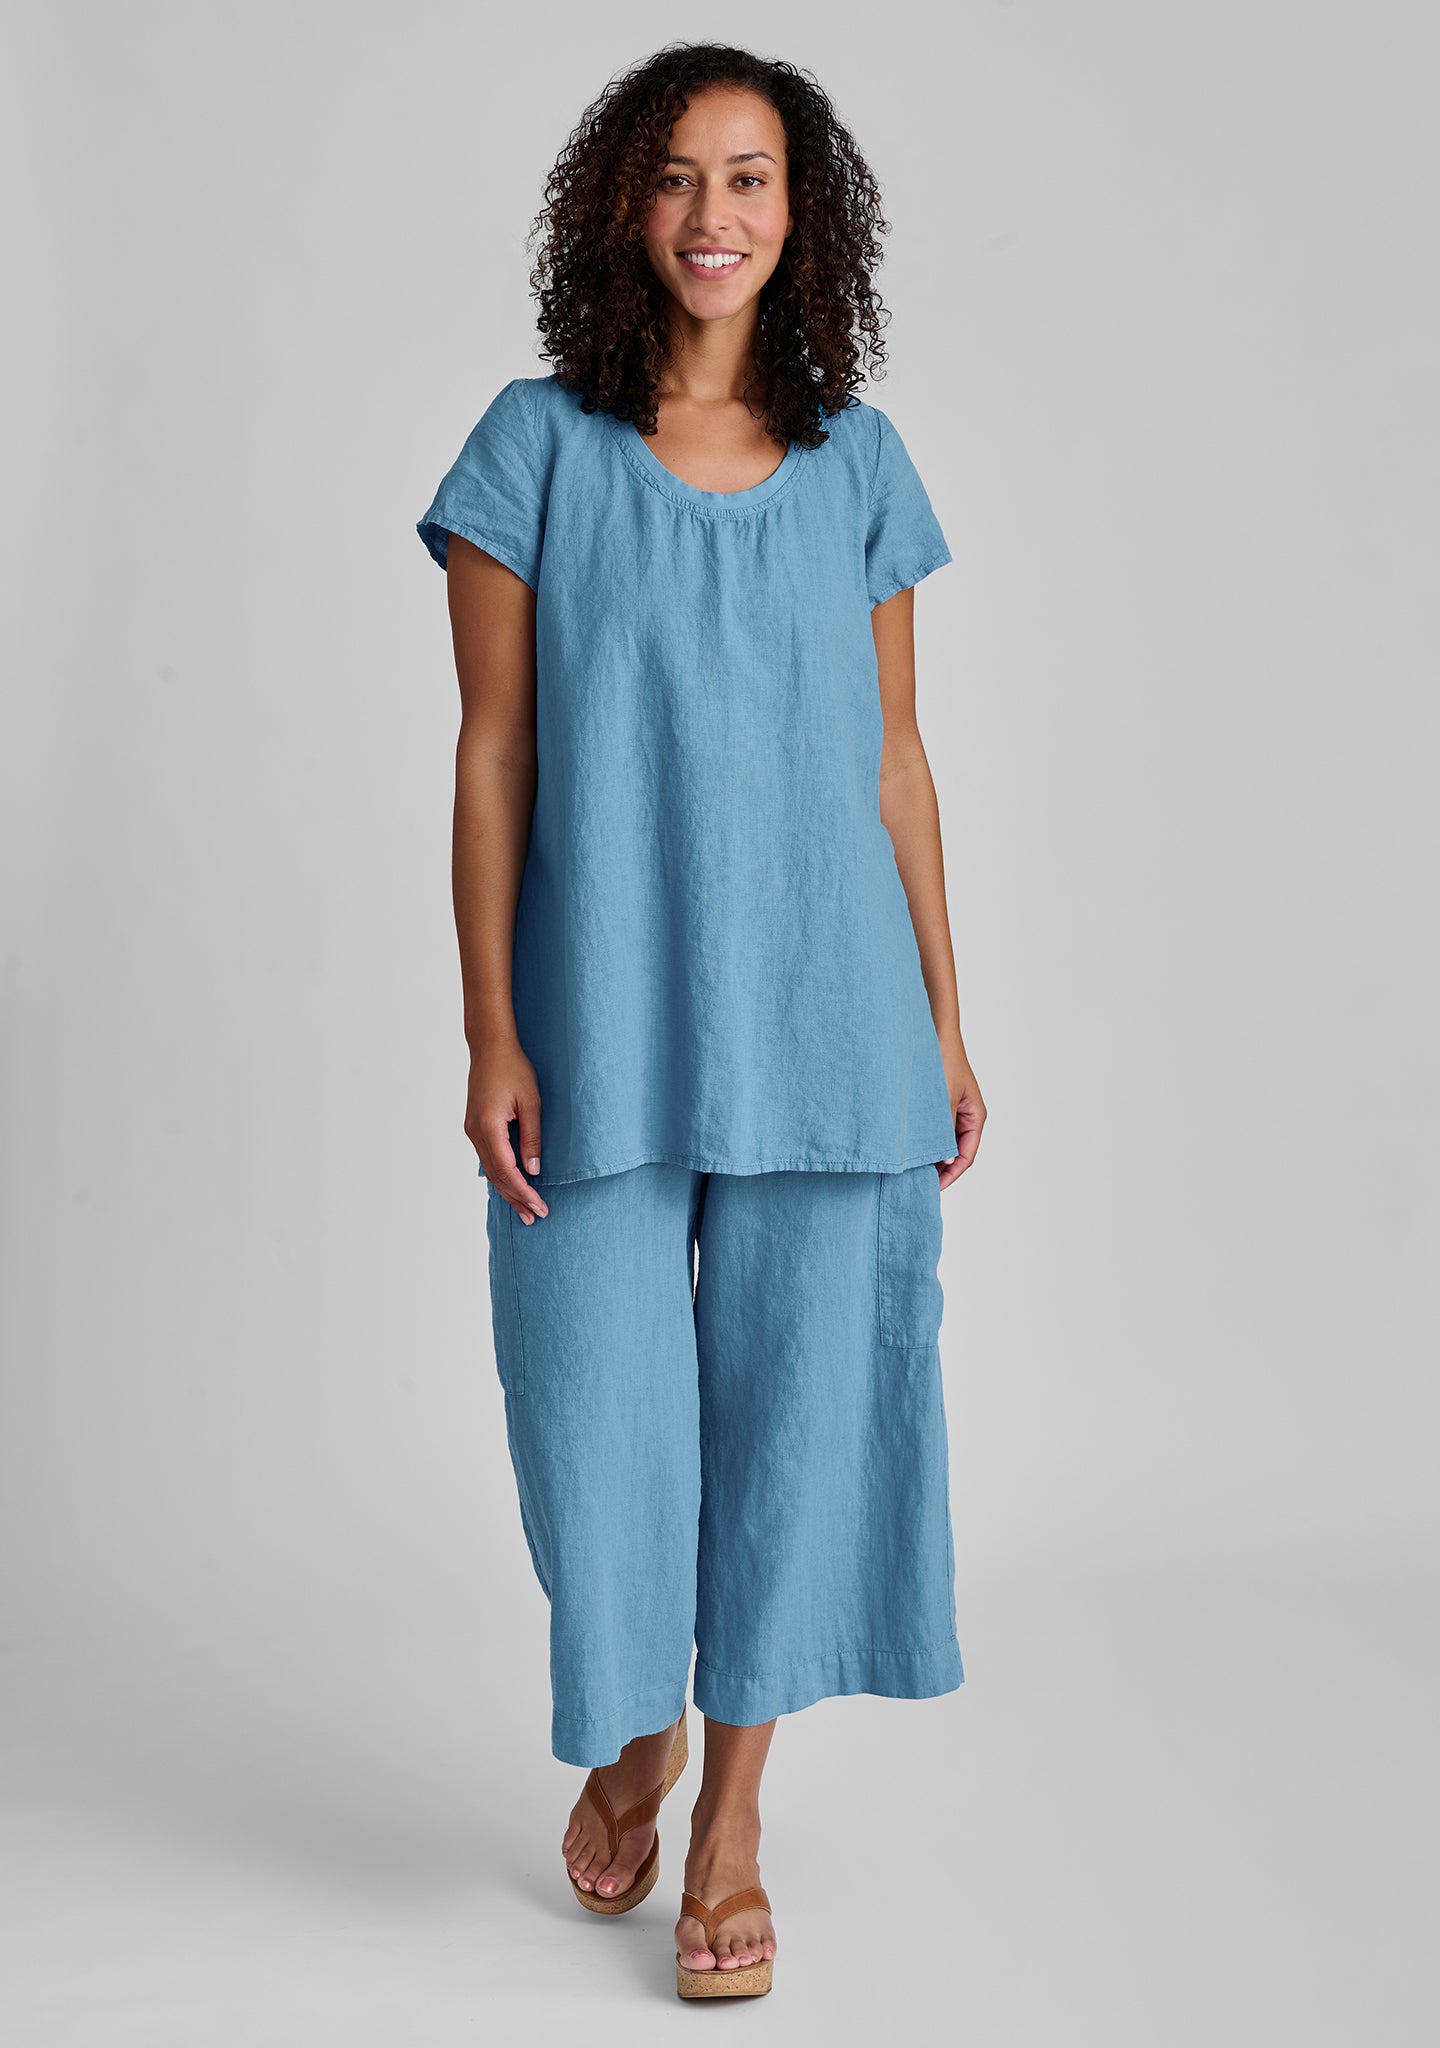 FLAX linen shirt in blue with linen pants in blue